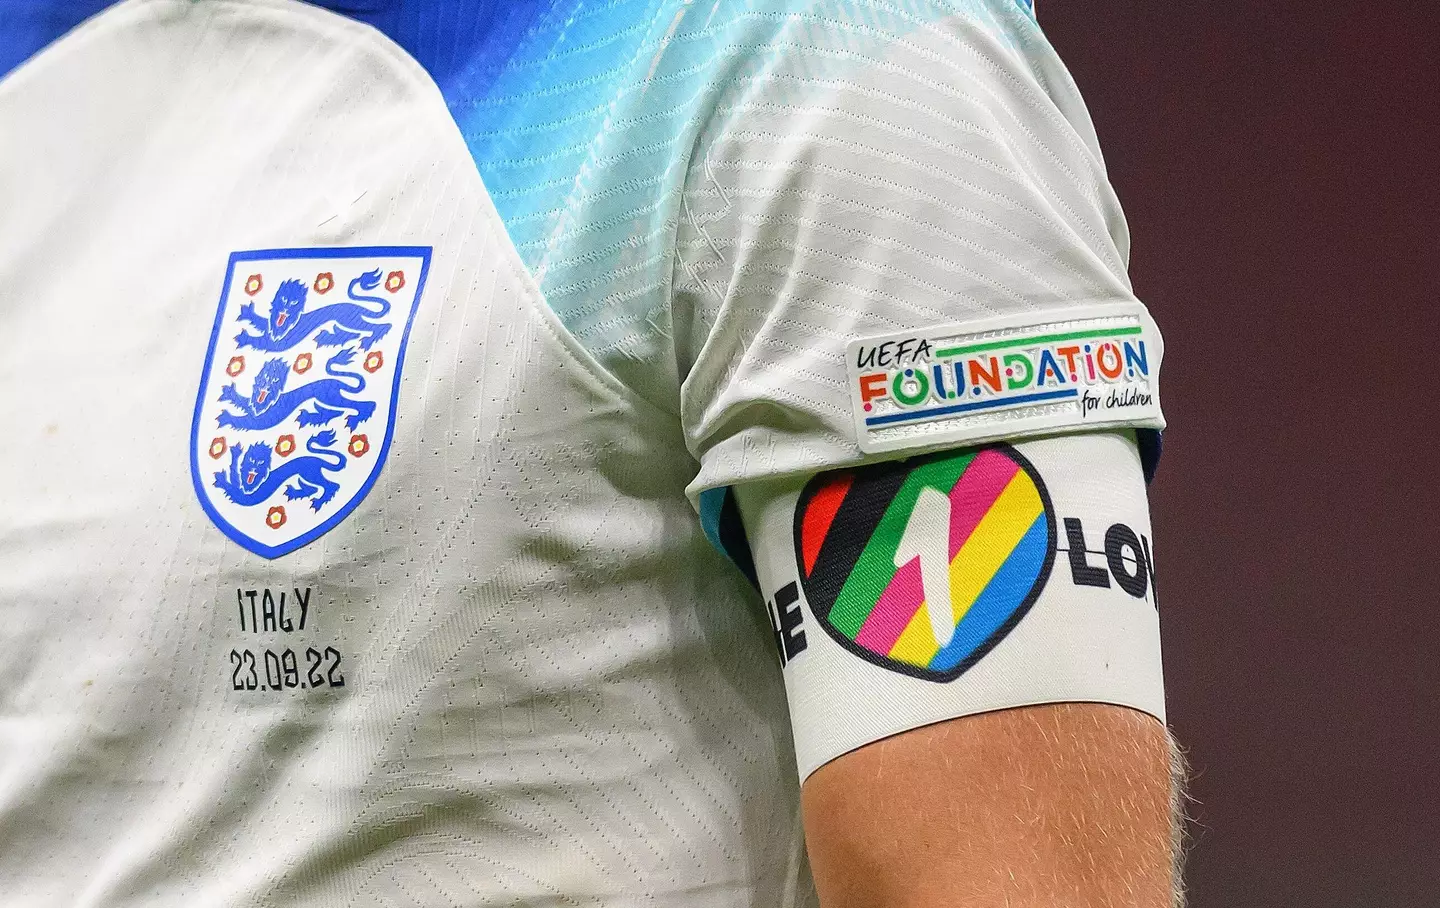 Harry Kane has worn the armband before, but the FA feared he could be suspended if he tried to wear it at the World Cup.